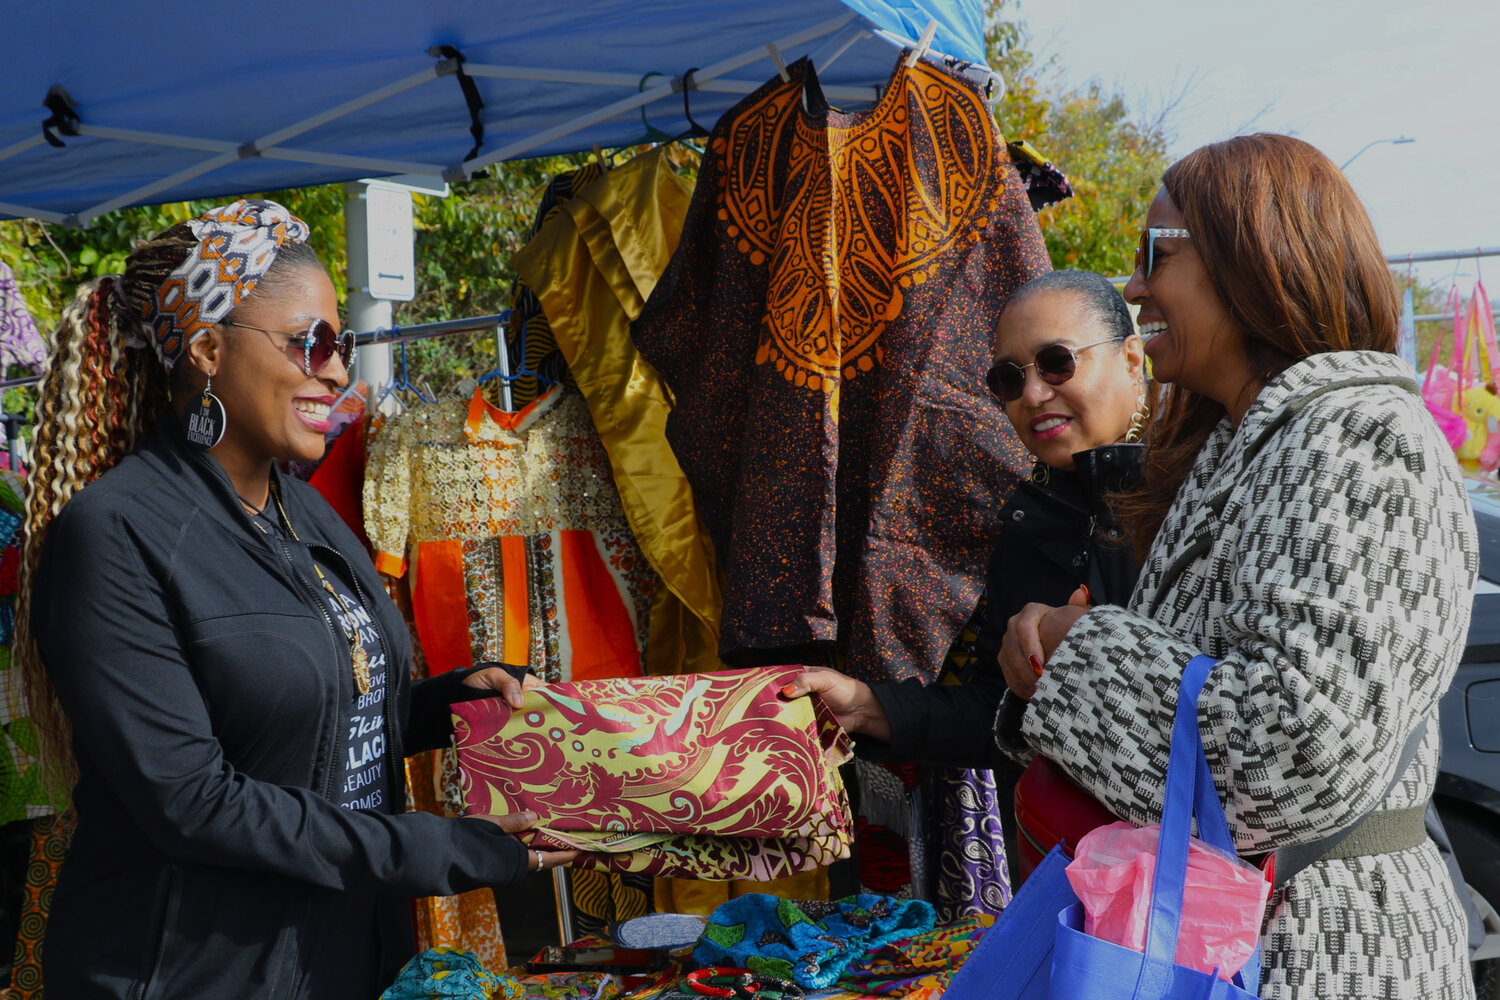 Chioma Okoro had many vibrant clothes, which Michelle Kemp and Diana Soares found a few colorful items to purchase.